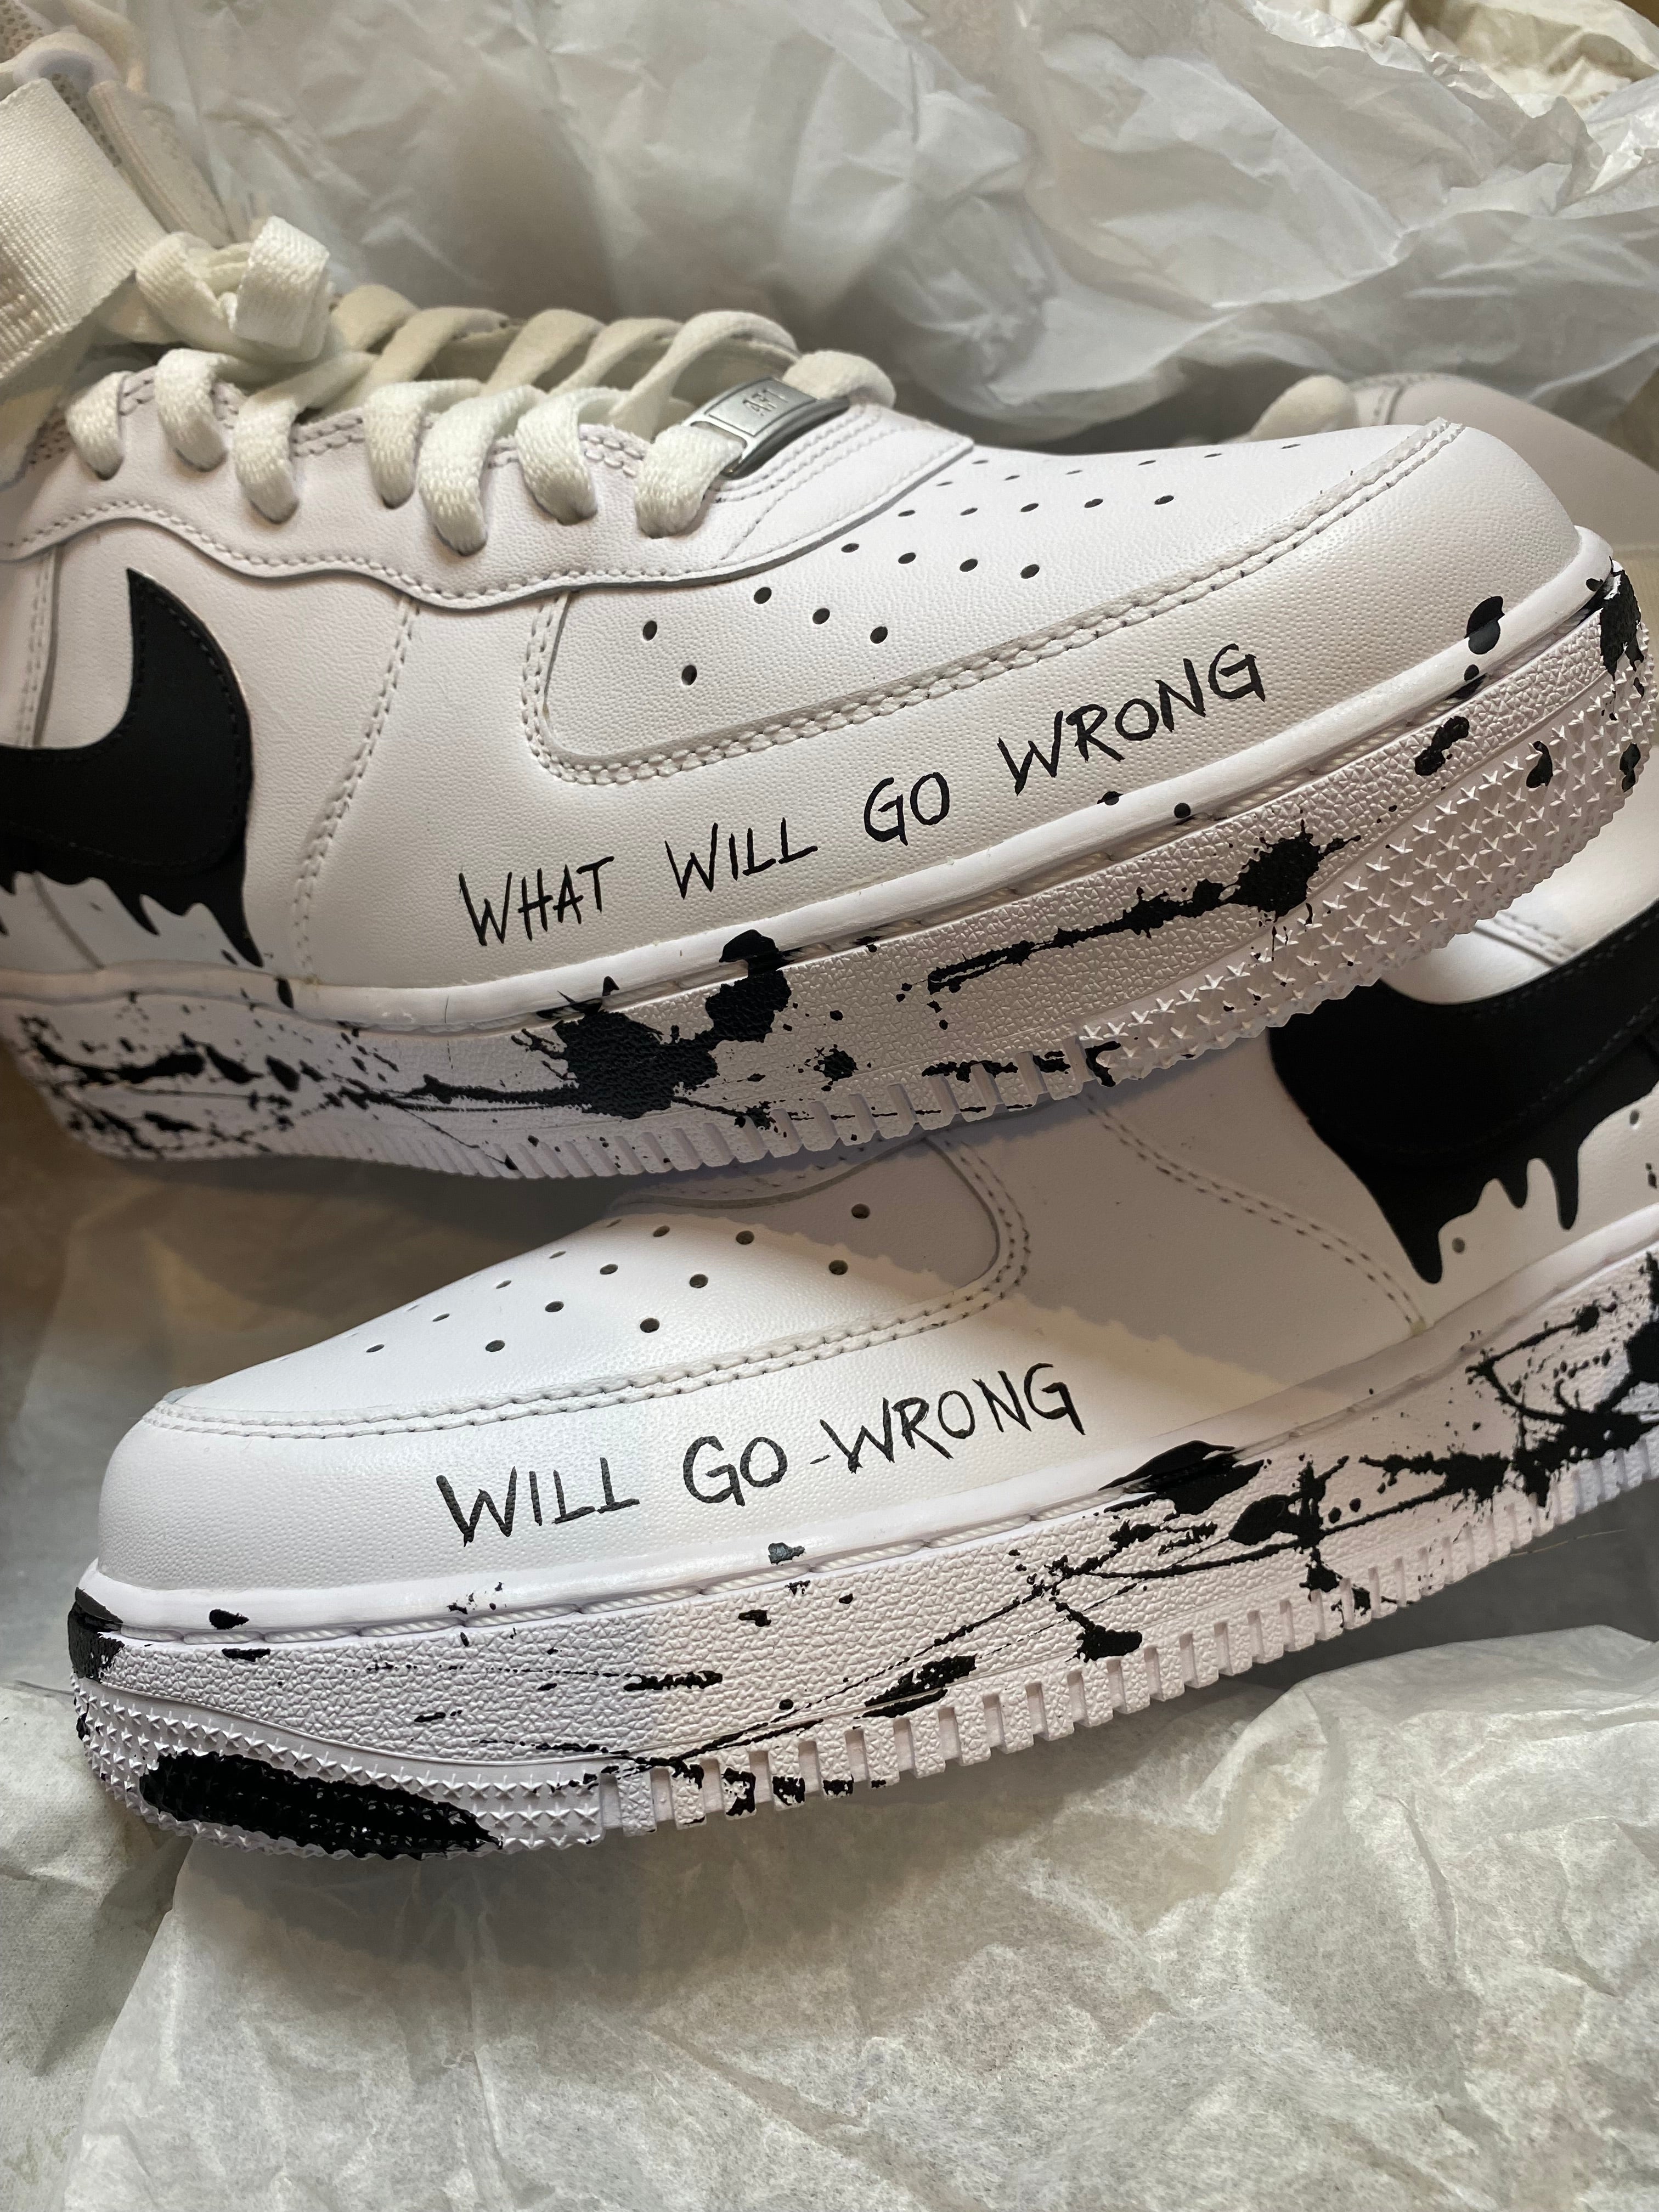 Black Drip and Splatter Paint Black Check Mark Air Force 1scustom Painted  Shoescustom Black and White Air Forces 